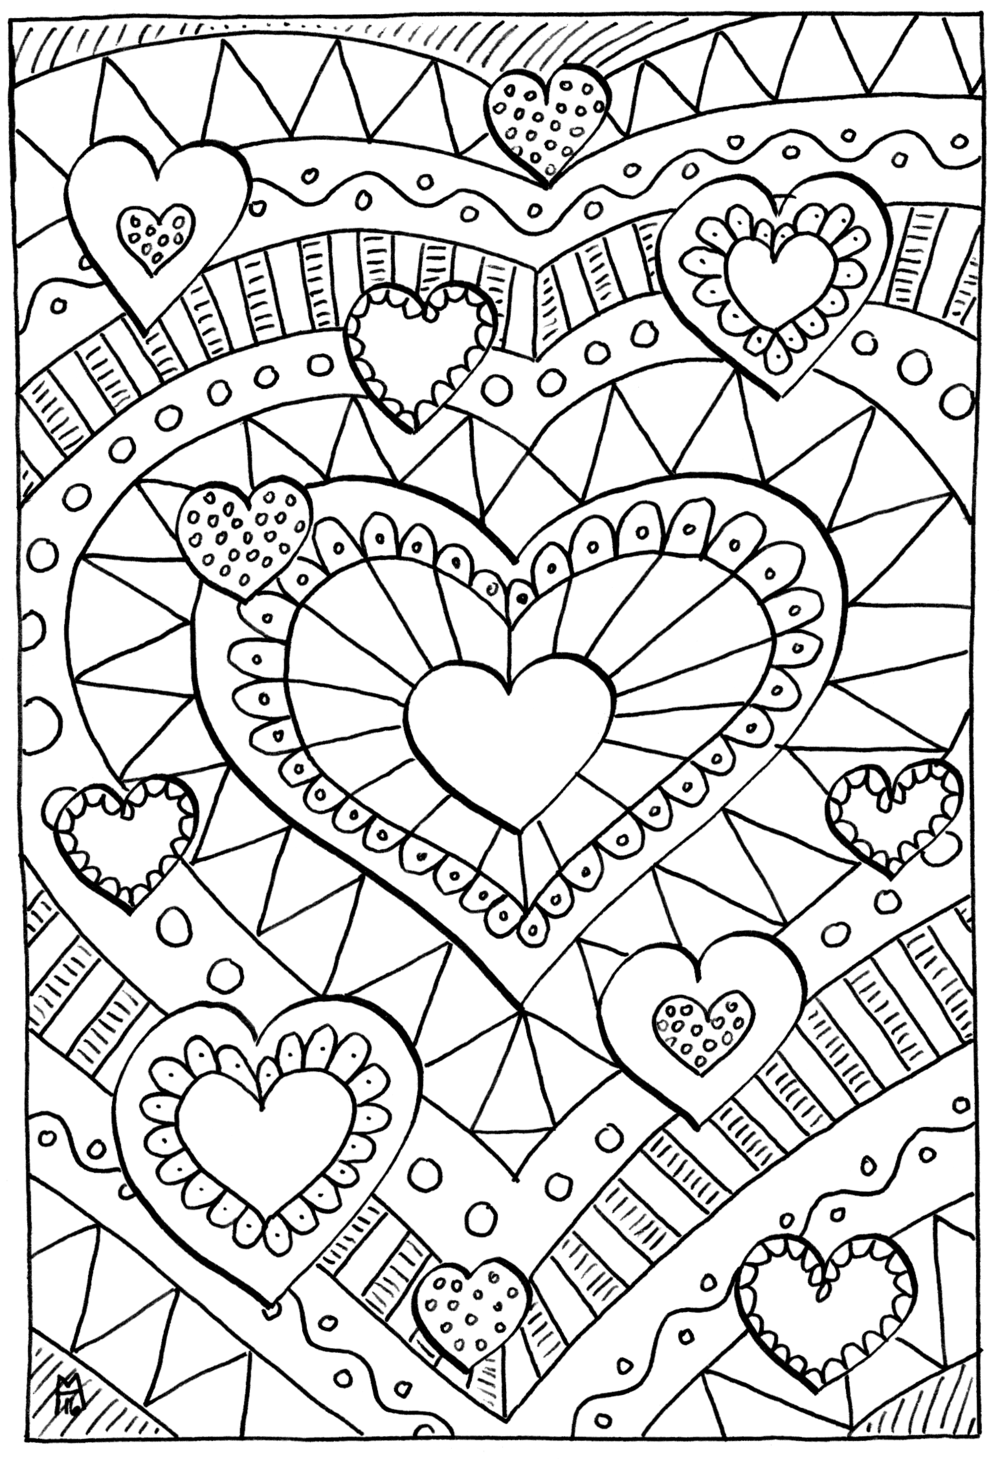 Healing Hearts Coloring Page FaveCraftscom